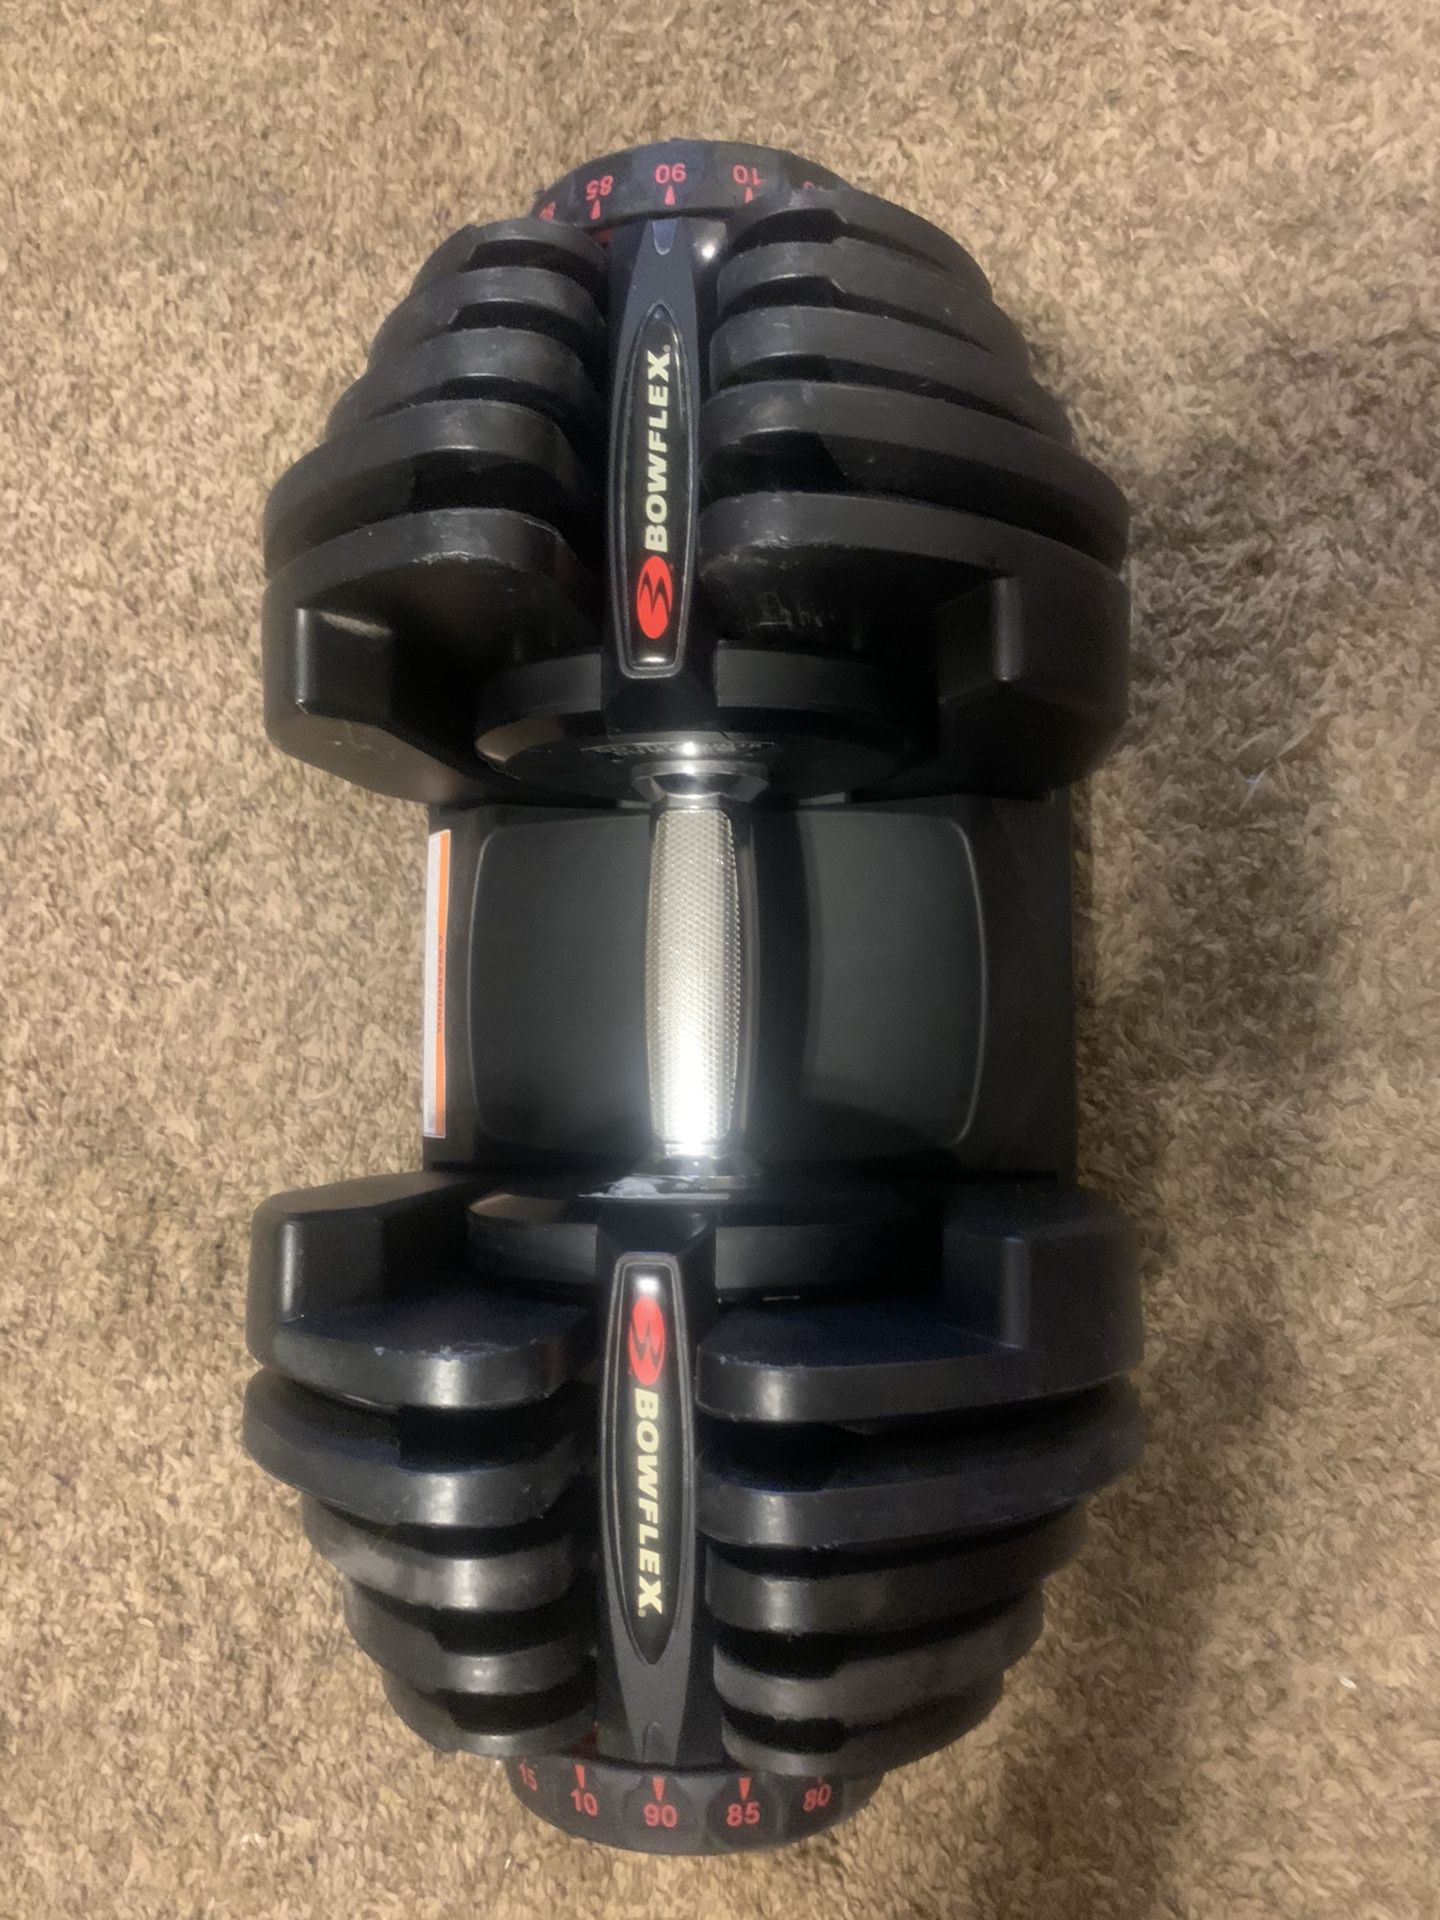 Bowflex 1090 dumbbells with bench